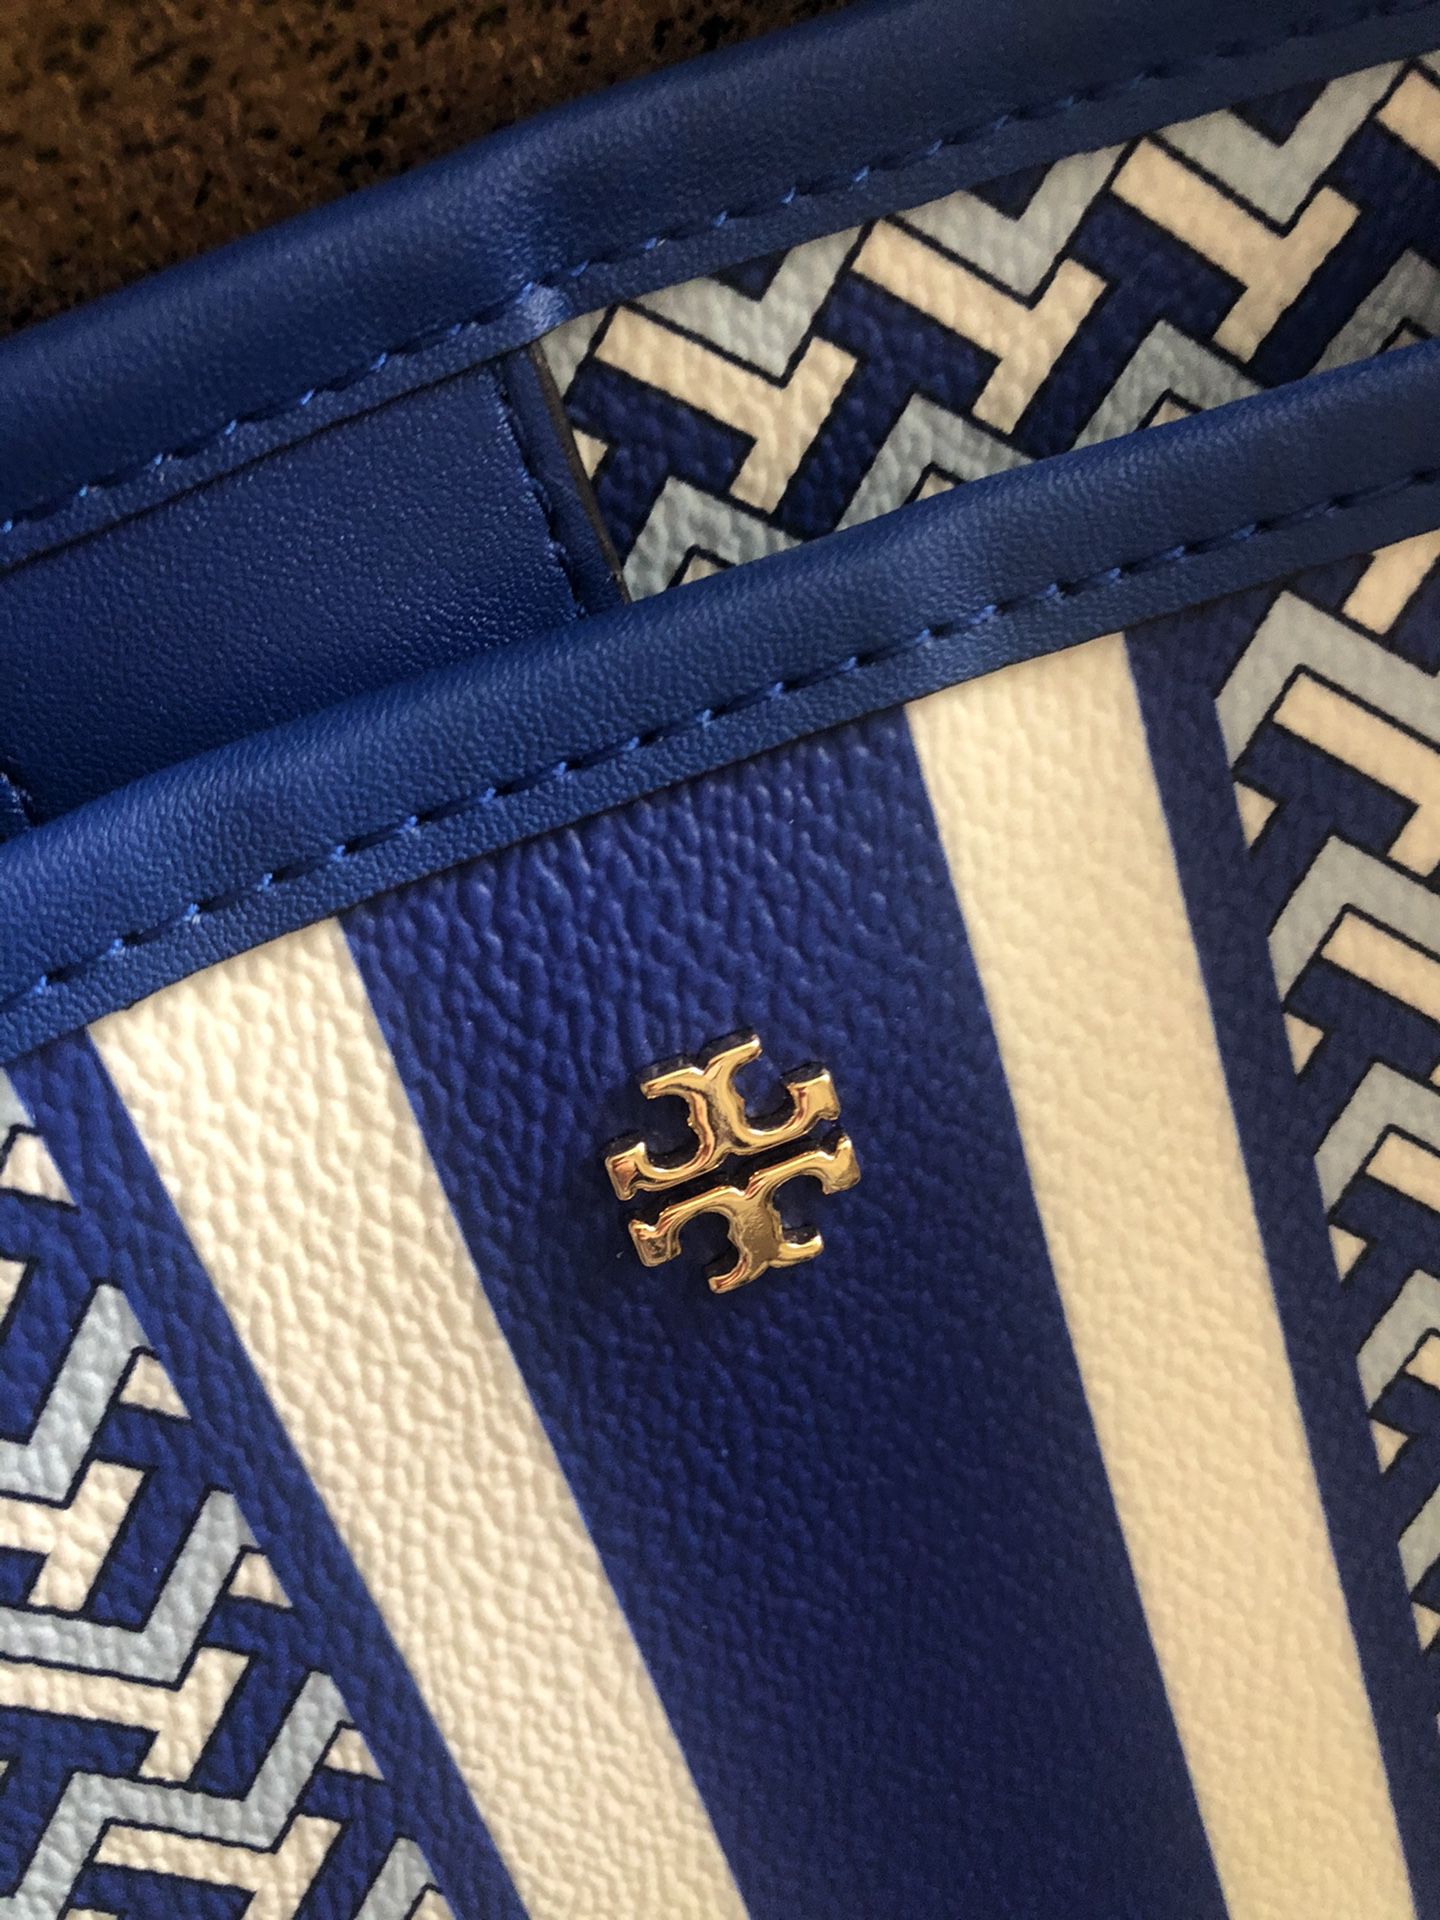 Tory Burch Gemini Link Canvas Tote Large New With Tags for Sale in  Glendale, CA - OfferUp